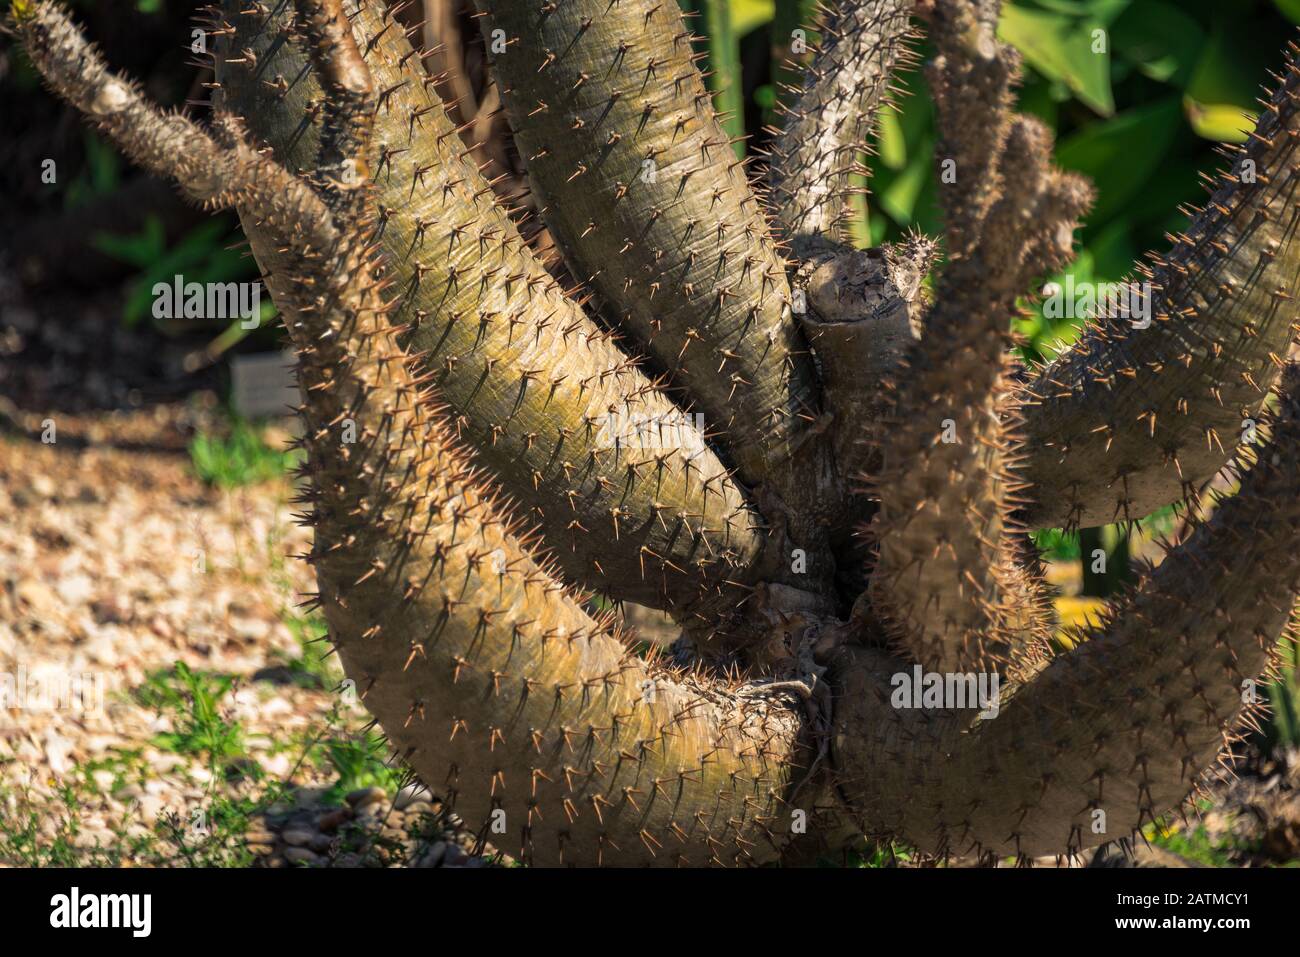 Close up of Austrocylindropuntia Subulata or Eve Pin succulent plant trunk, stems with sharp spikes, needles. Eves Needle cactus plant detail Stock Photo